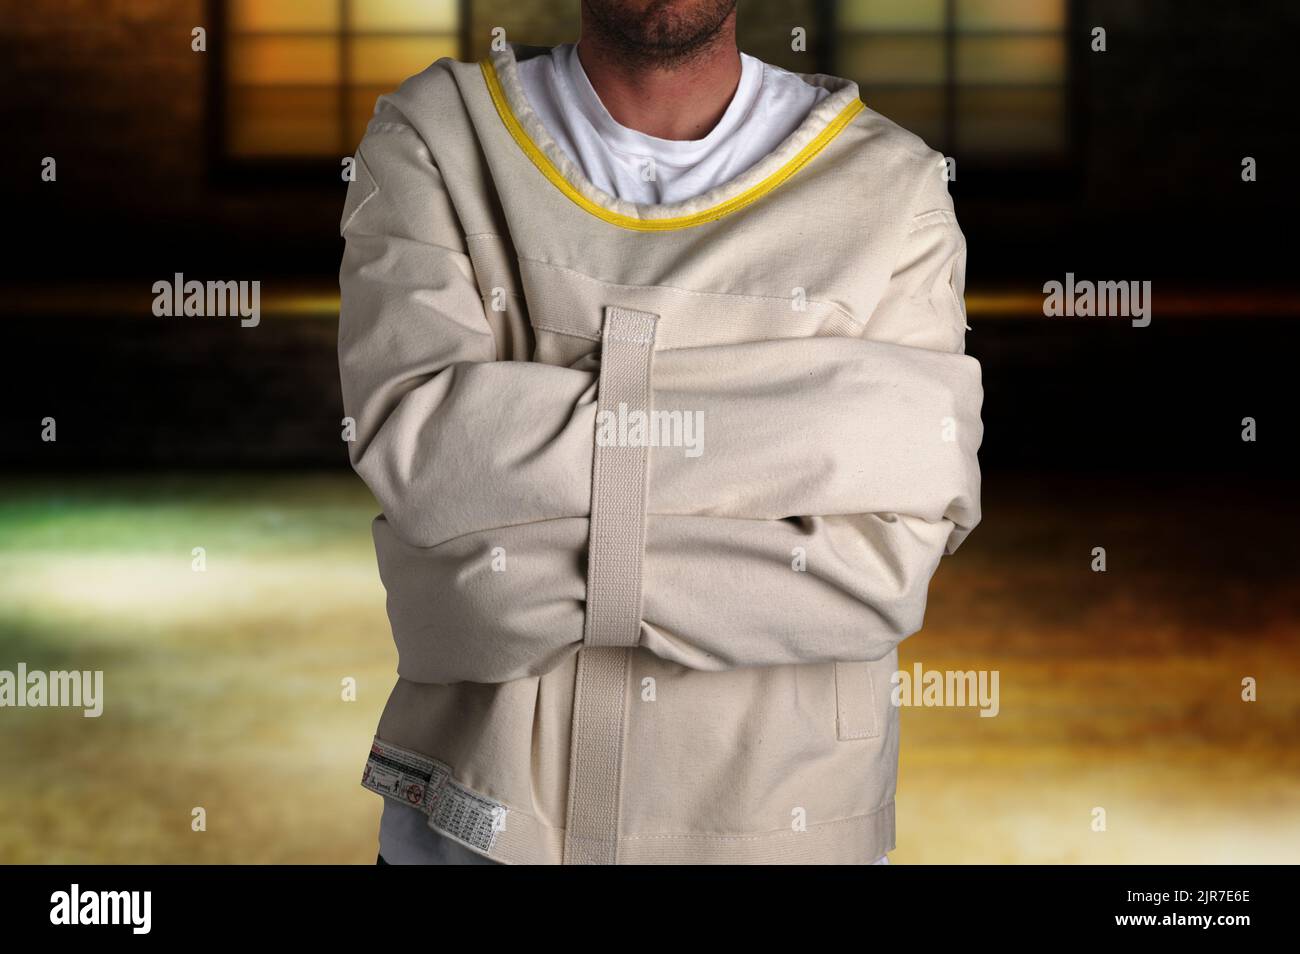 Man wearing a straitjacket, a symbol of despair due to mental illness Stock Photo